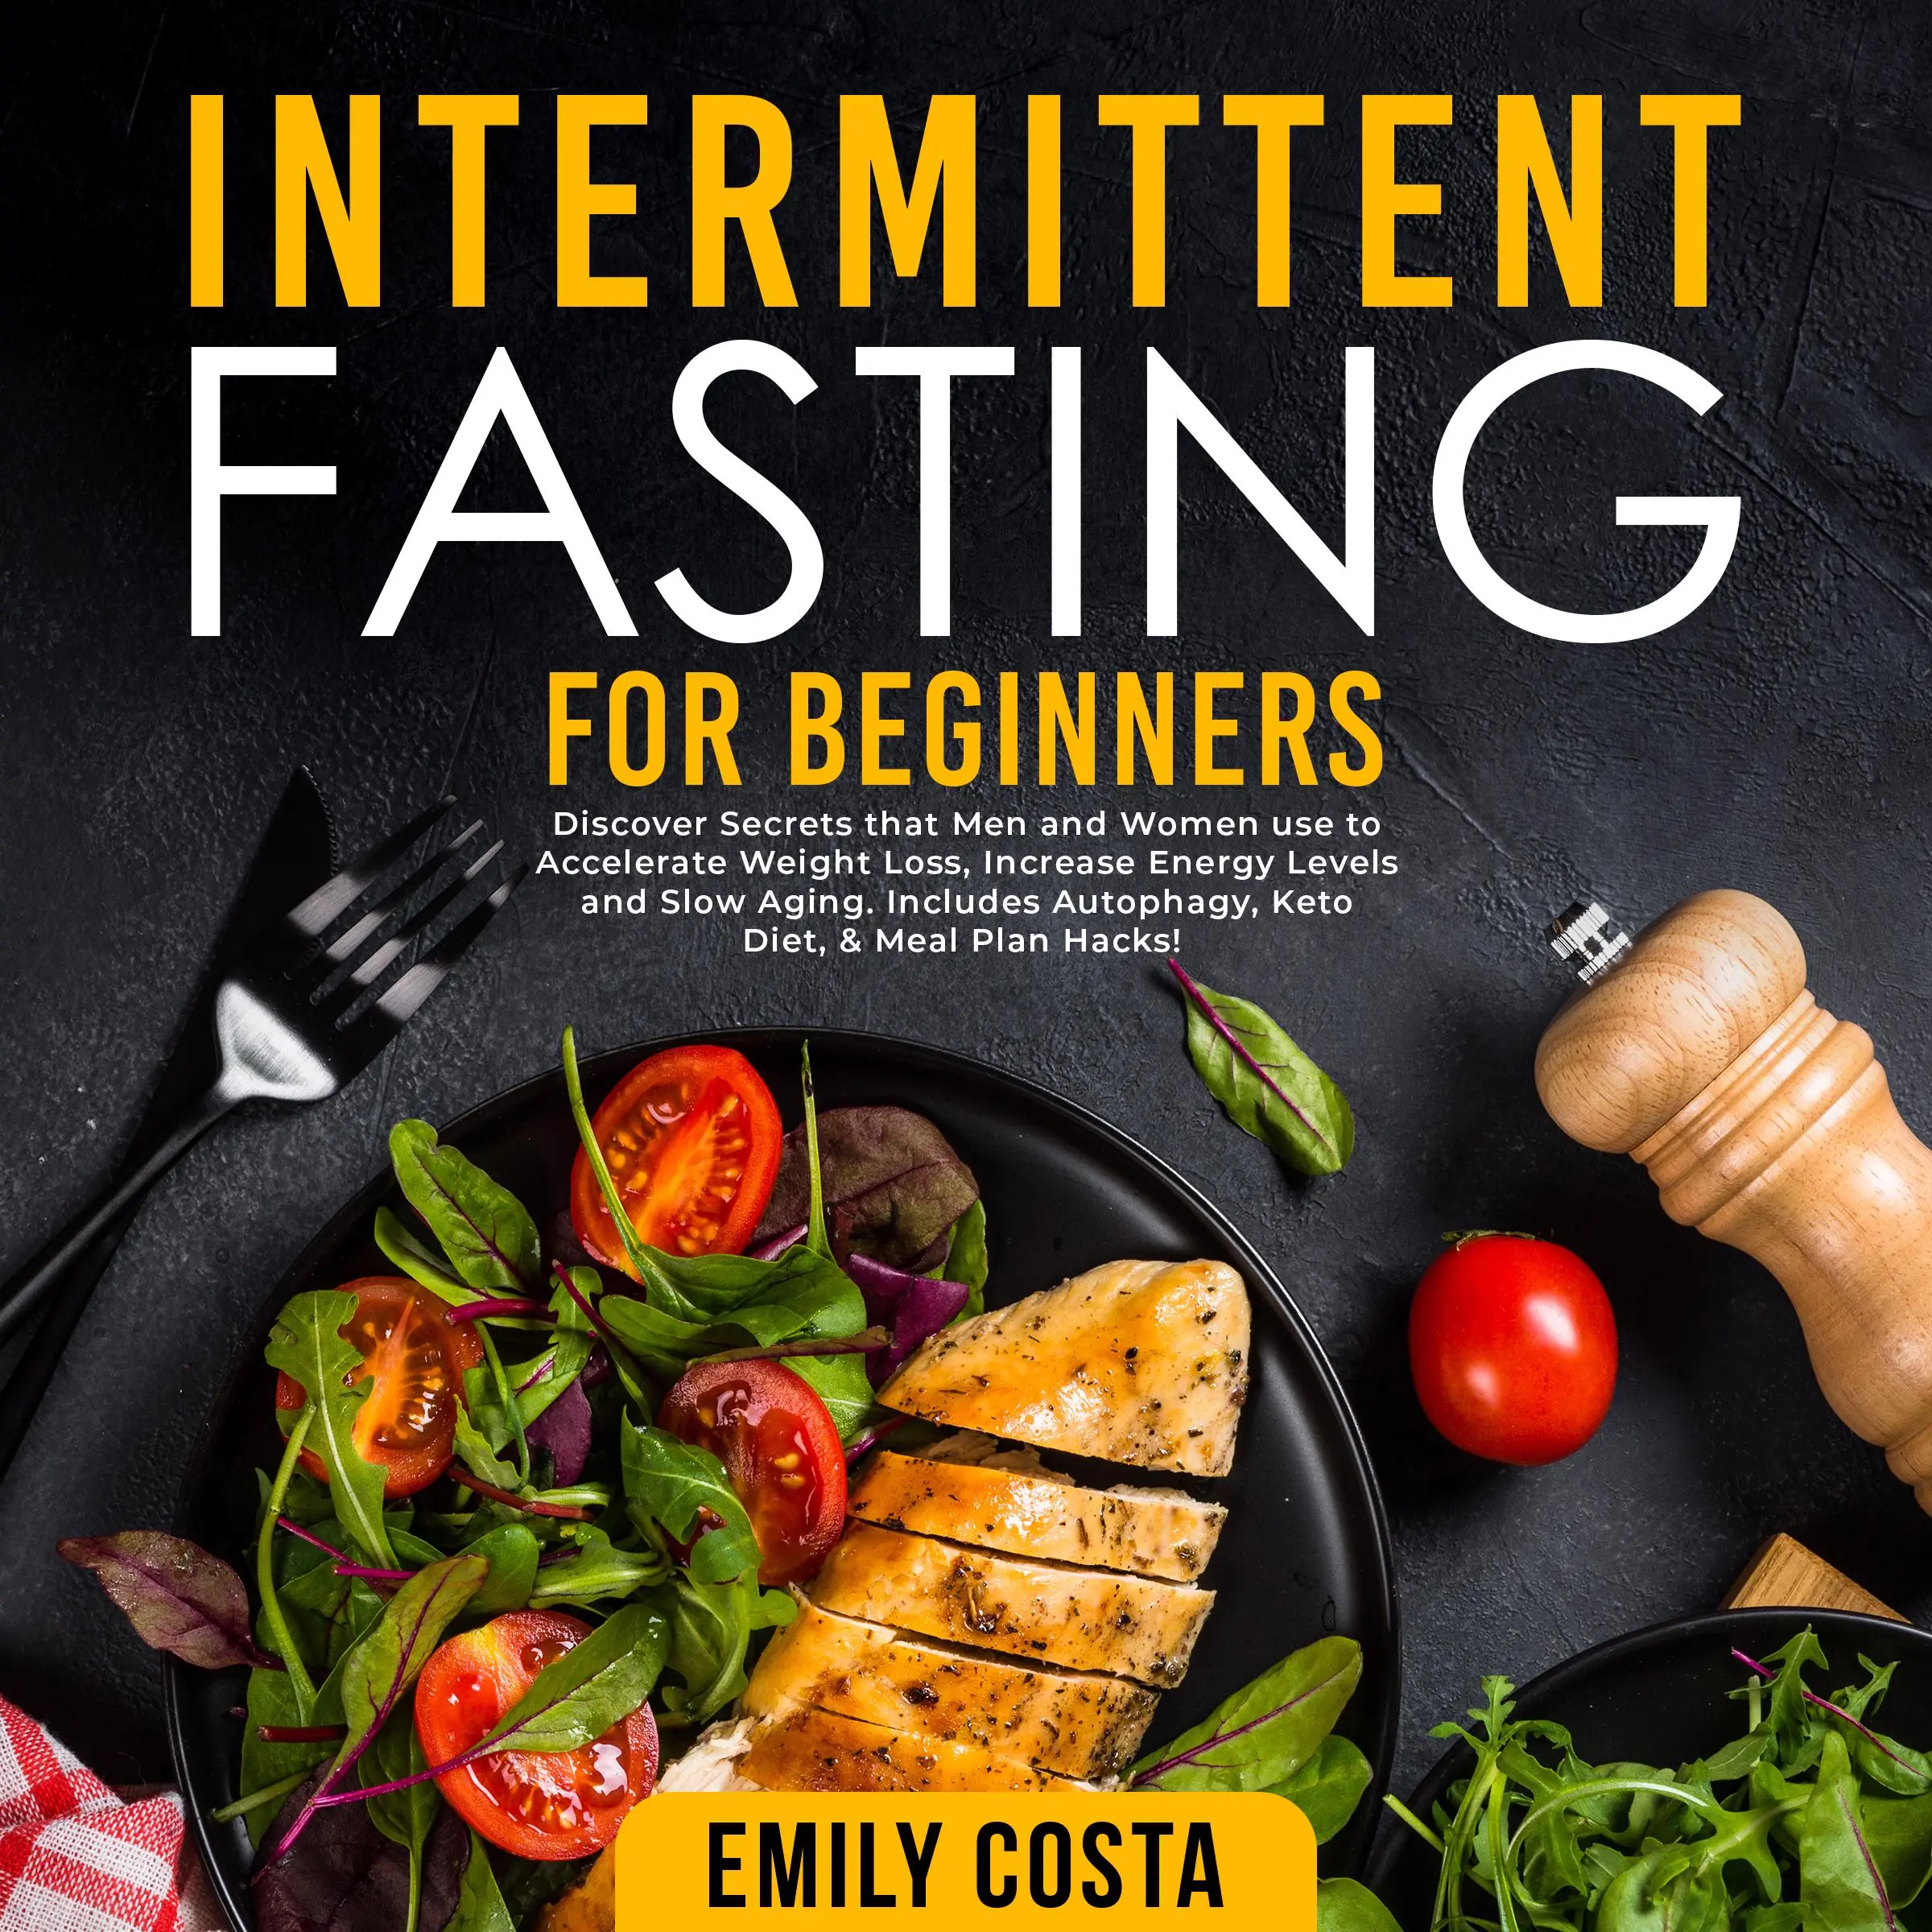 Intermittent Fasting for Beginners: Discover Secrets that Men and Women use to Accelerate Weight Loss, Increase Energy Levels and Slow Aging. Includes Autophagy, Keto Diet, & Meal Plan Hacks! Audiobook by Emily Costa